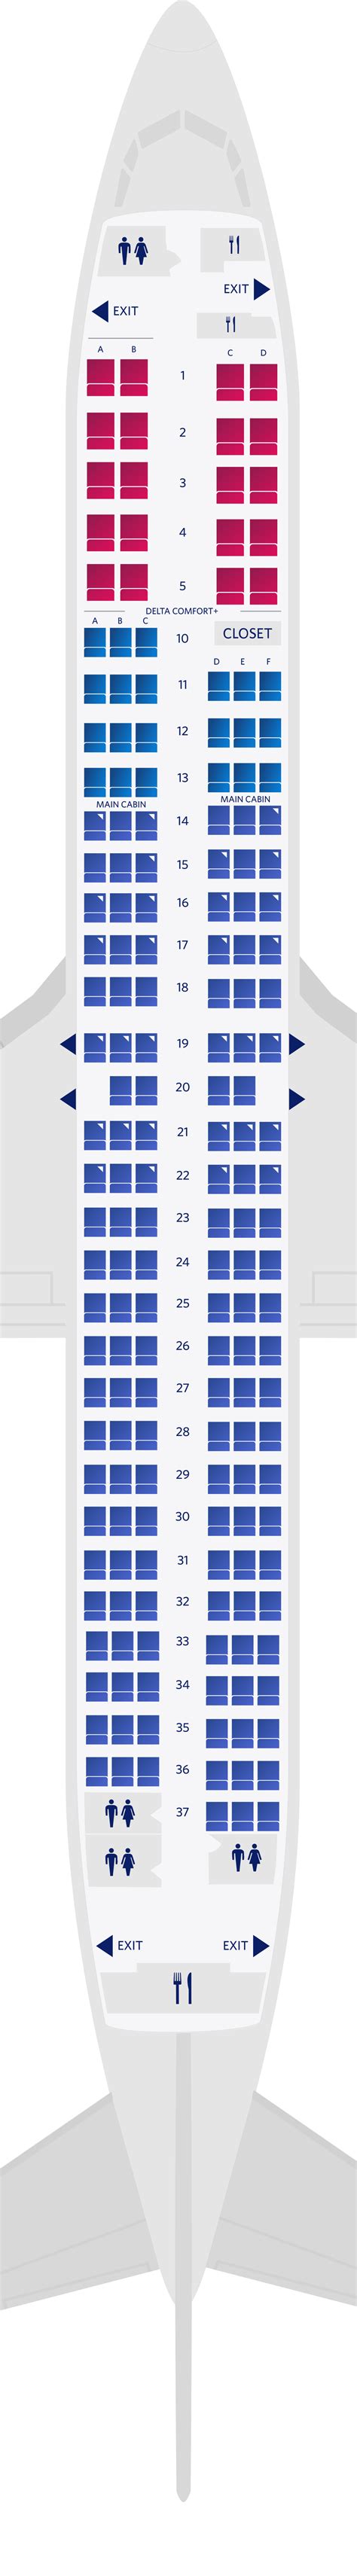 Boeing Seating Chart Delta My Bios